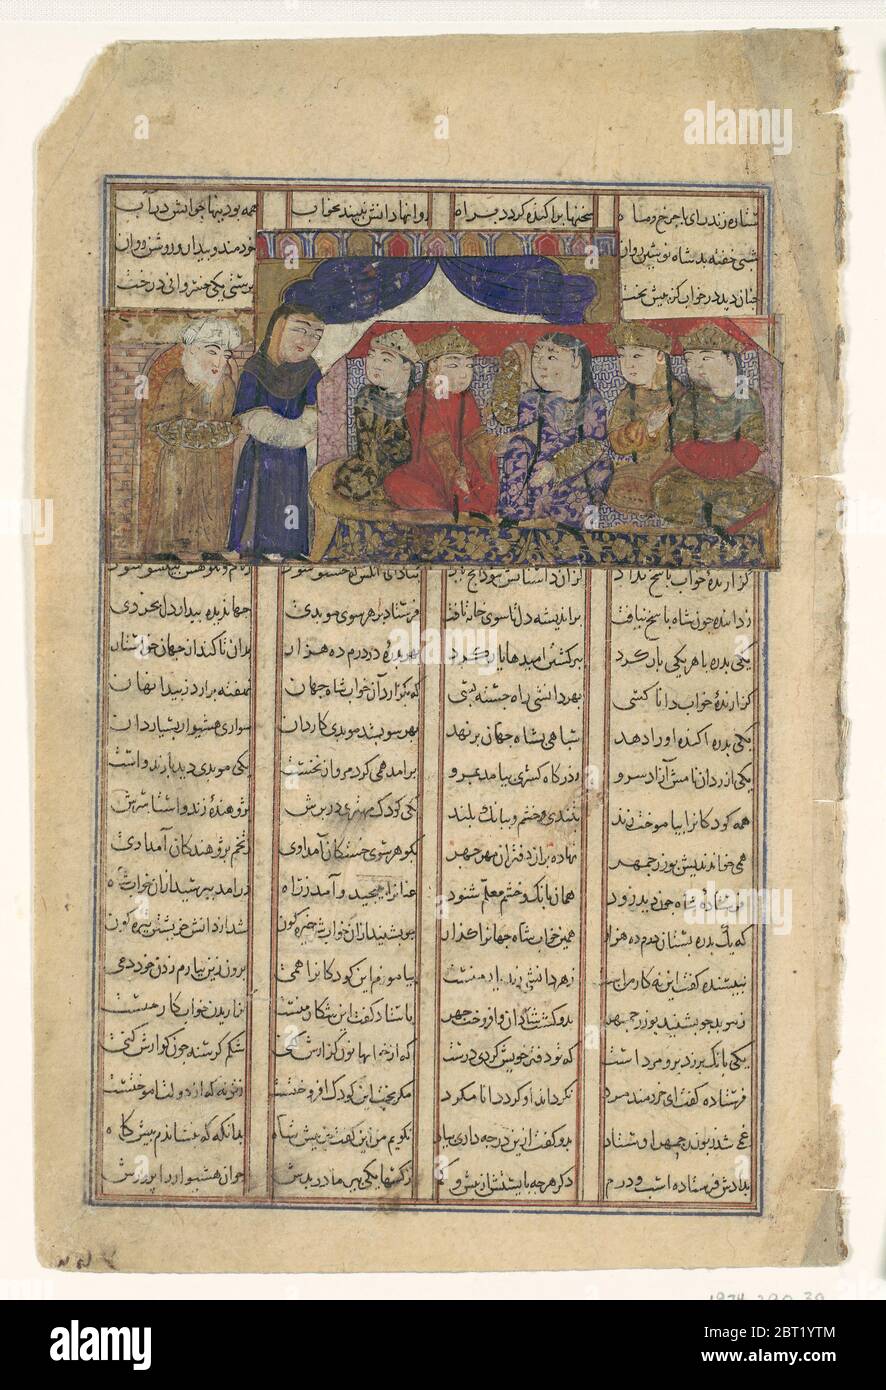 Mihran Sitad Chooses a Daughter of the Khaqan of Chin, Folio from a Shahnama (Book of Kings) of Firdausi, ca. 1330-40. Stock Photo